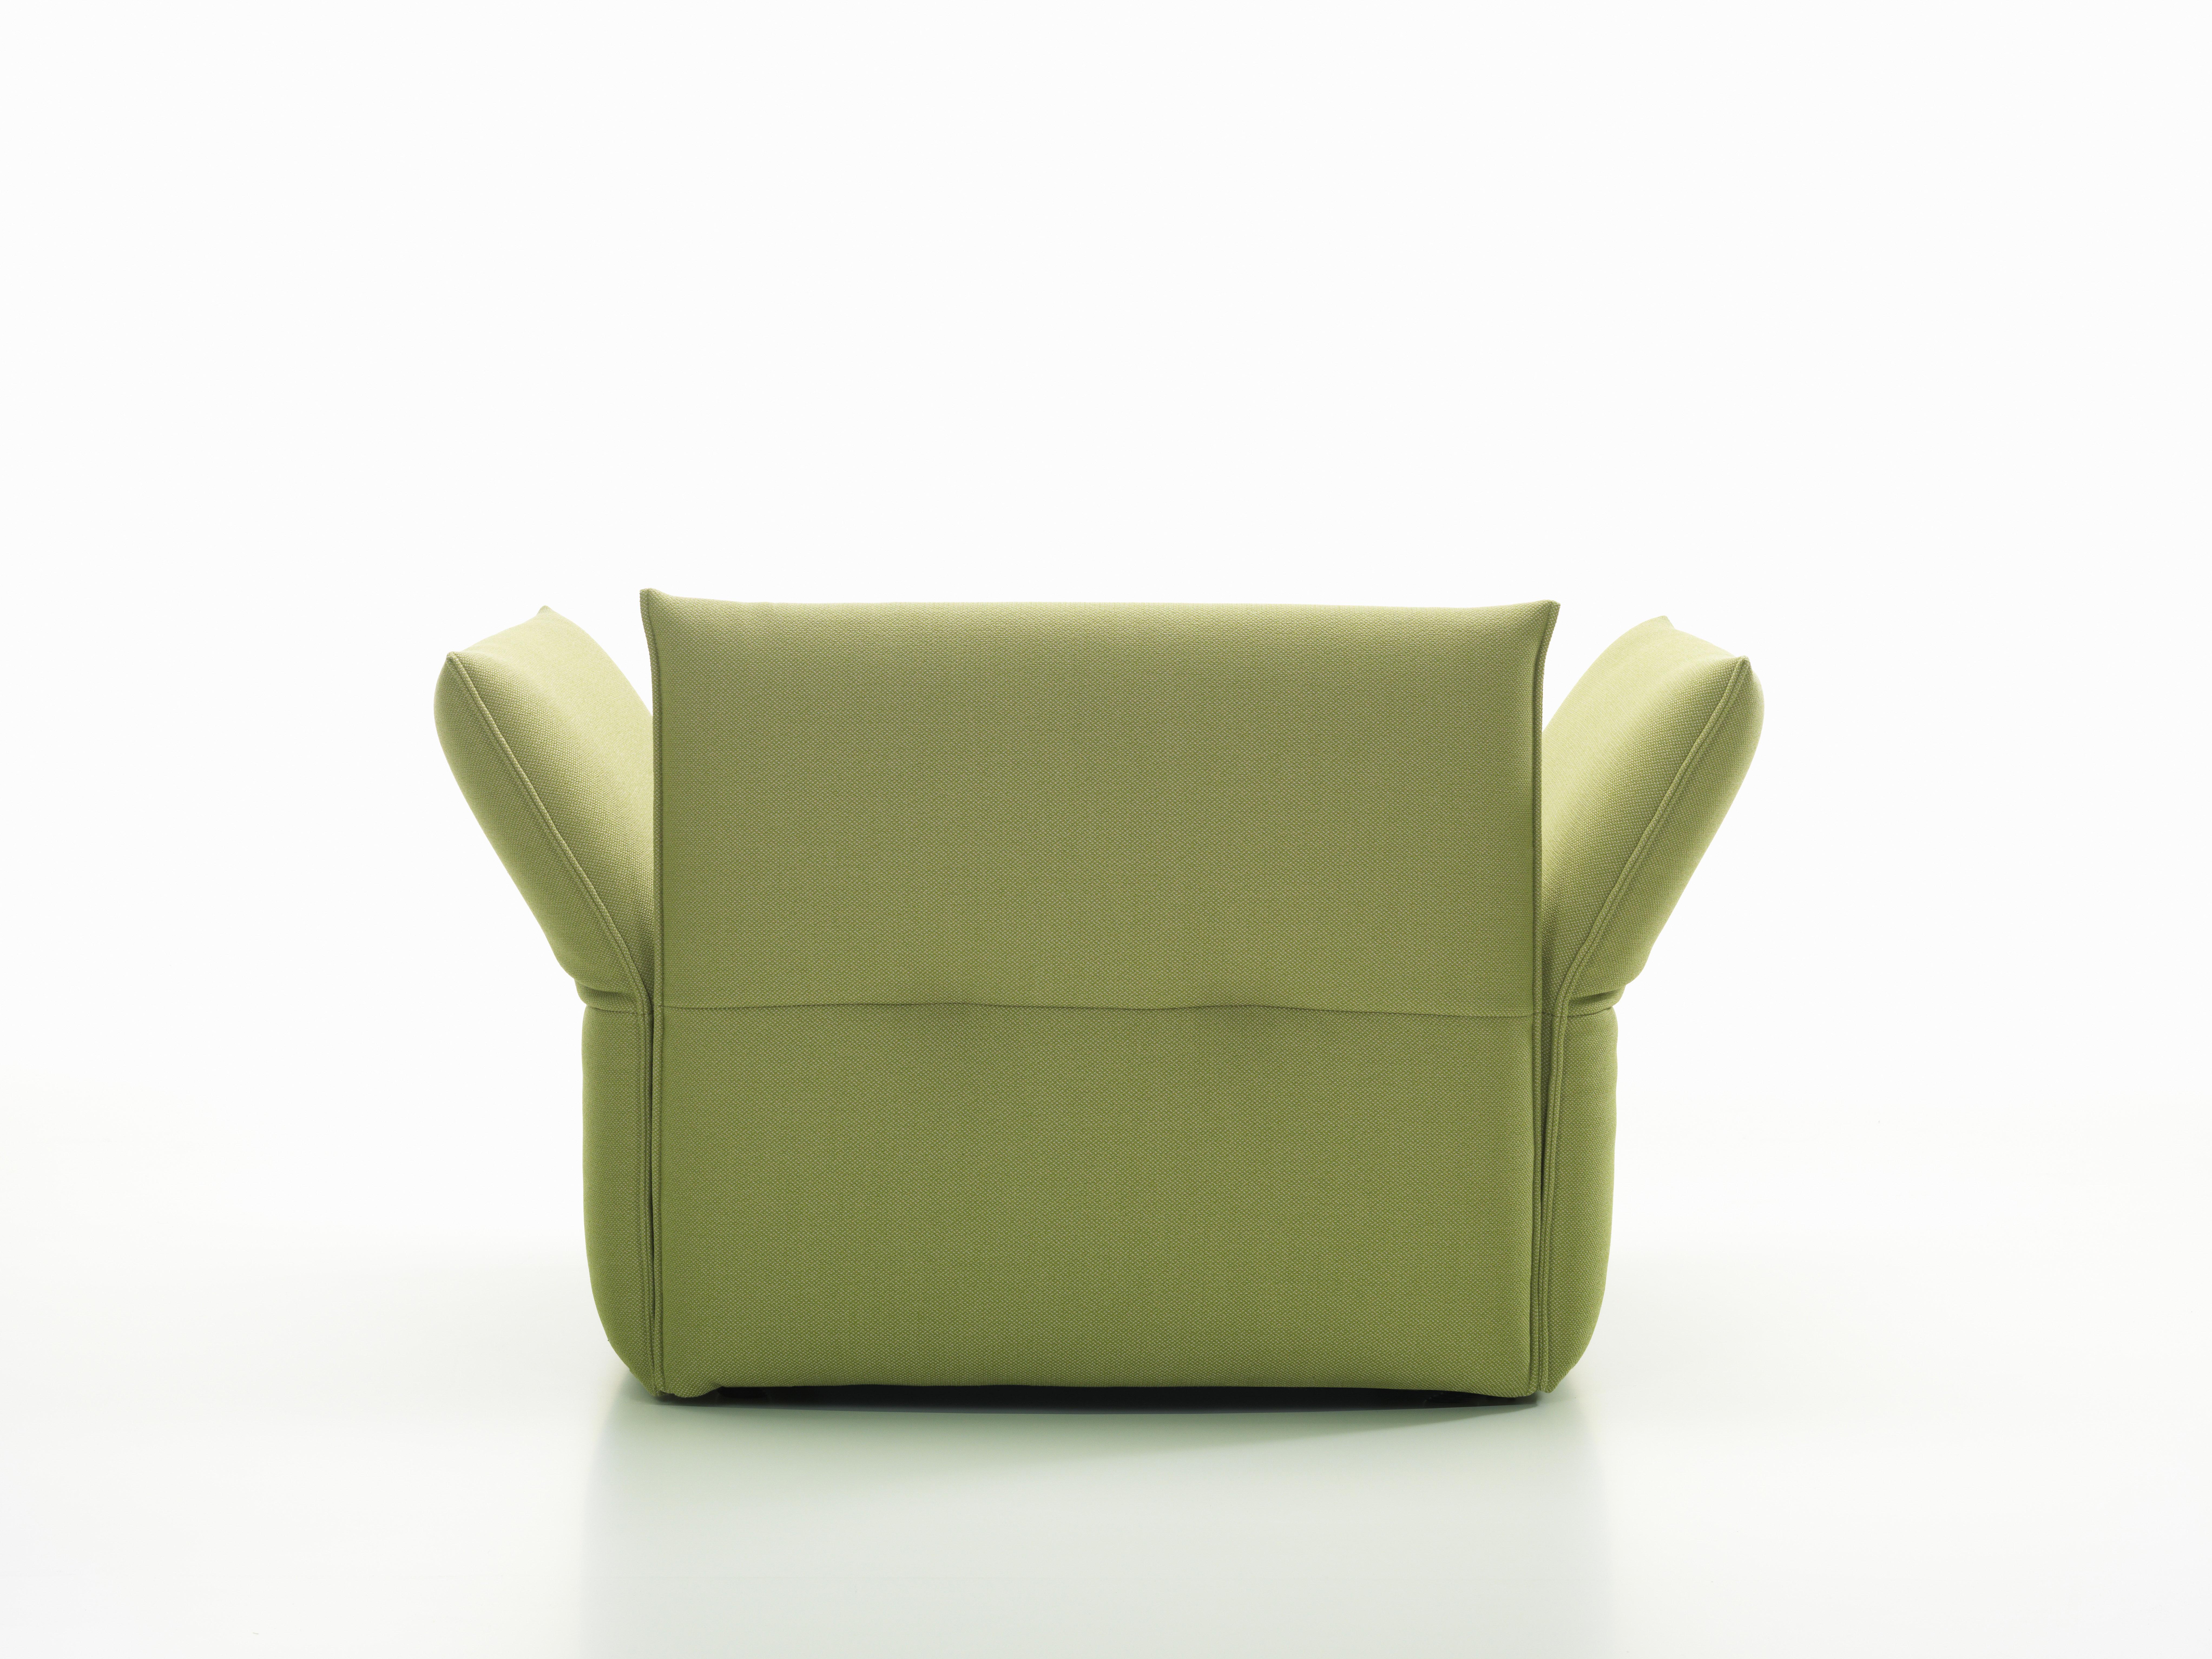 Contemporary Vitra Mariposa Loveseat in Sand & Avocado Credo by Edward Barber & Jay Osgerby For Sale